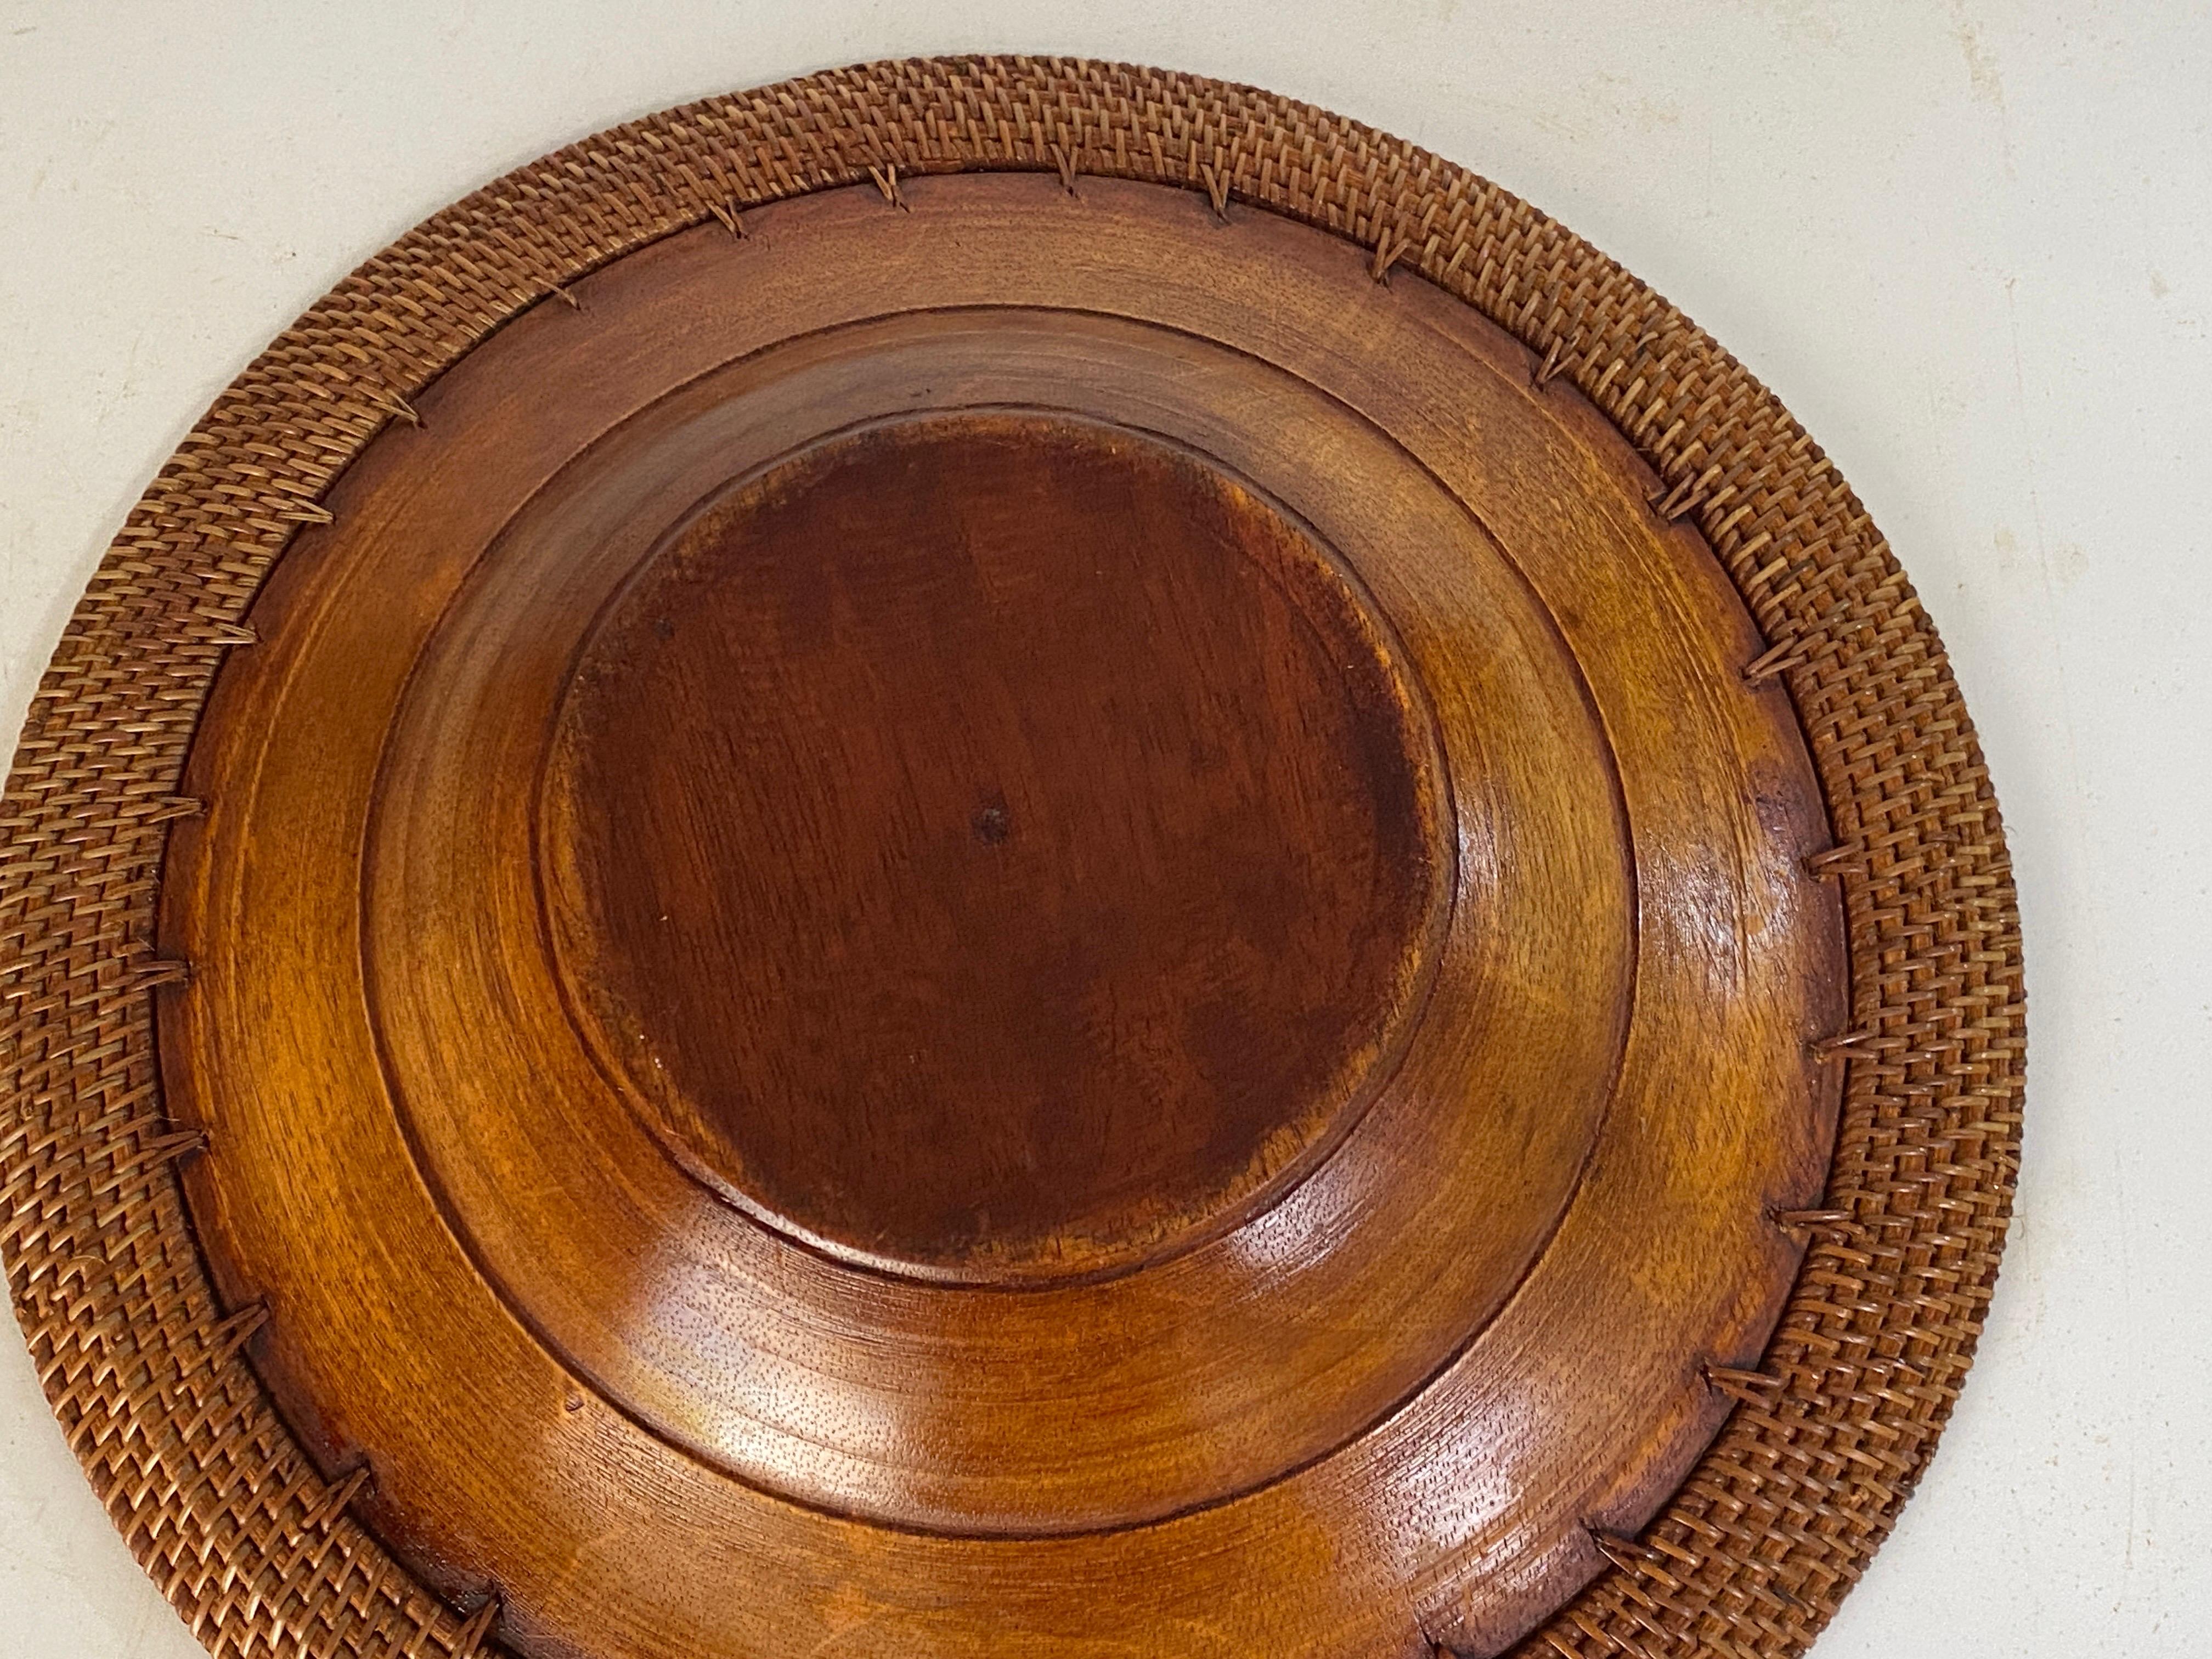 Large Decorative wood Plate in a brown color. Old and beautiful Patina.
Circa 1960